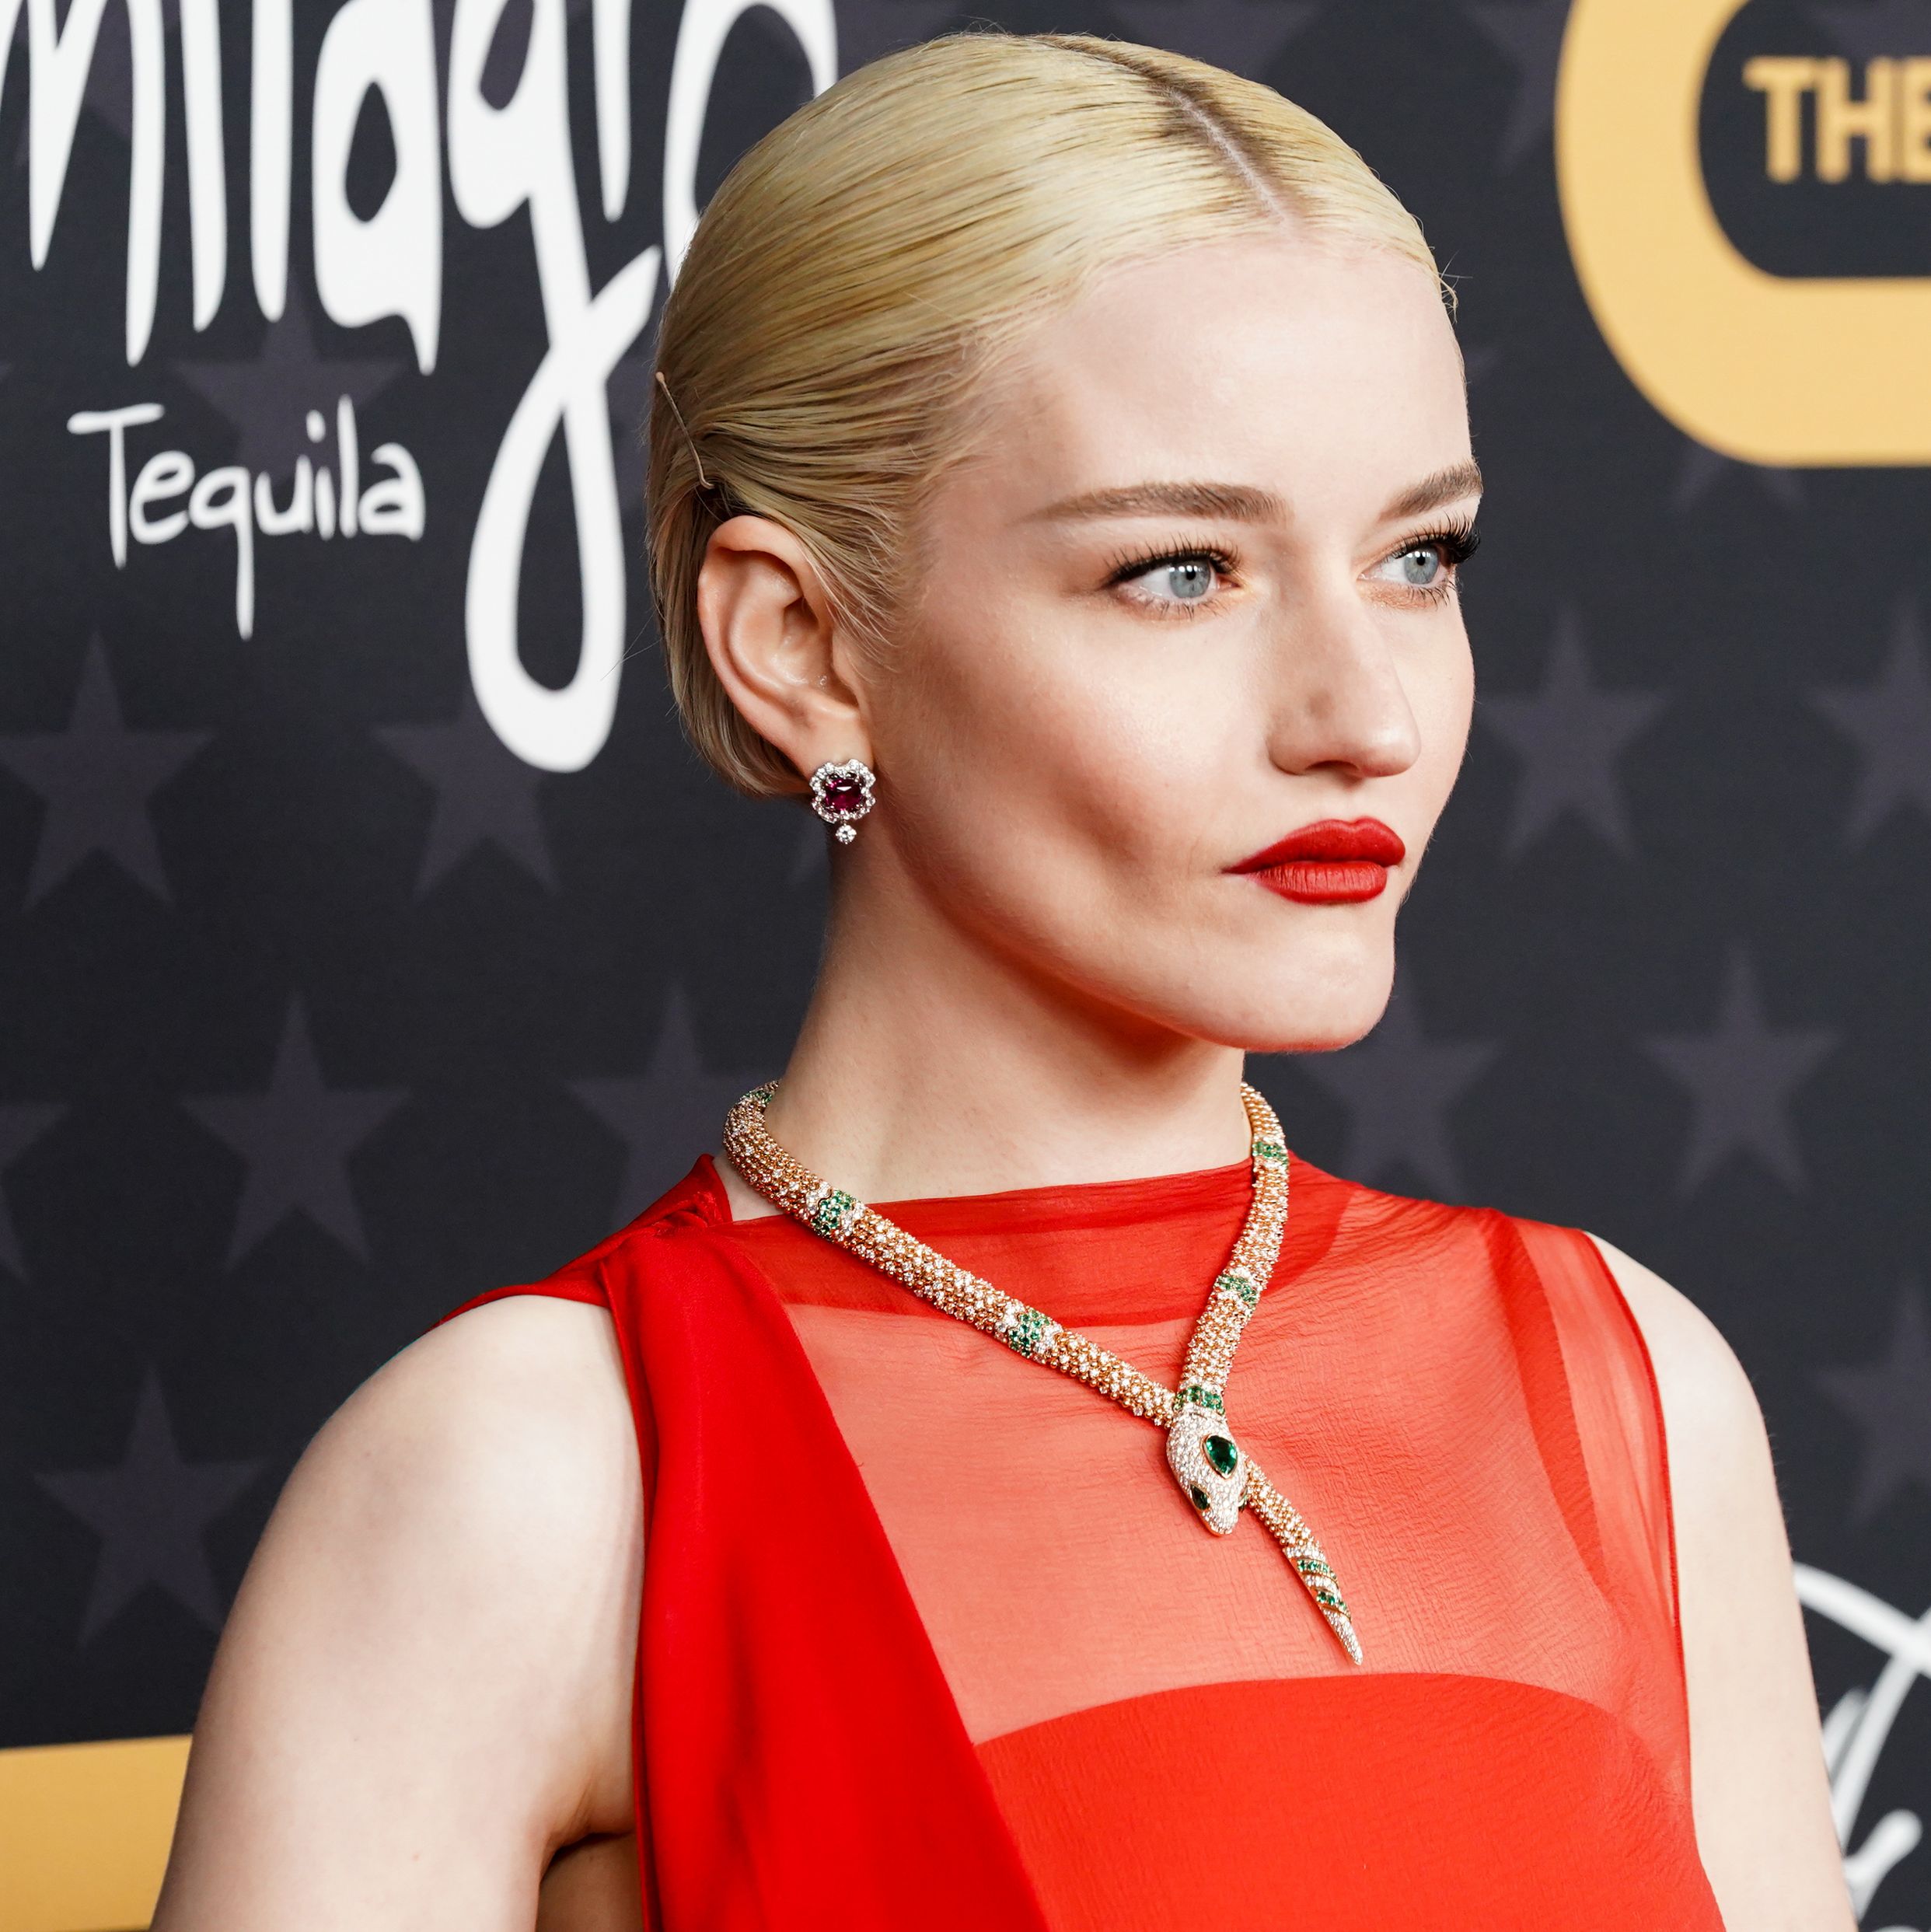 This Bold Red-Carpet Jewelry Trend Has a Fascinating History